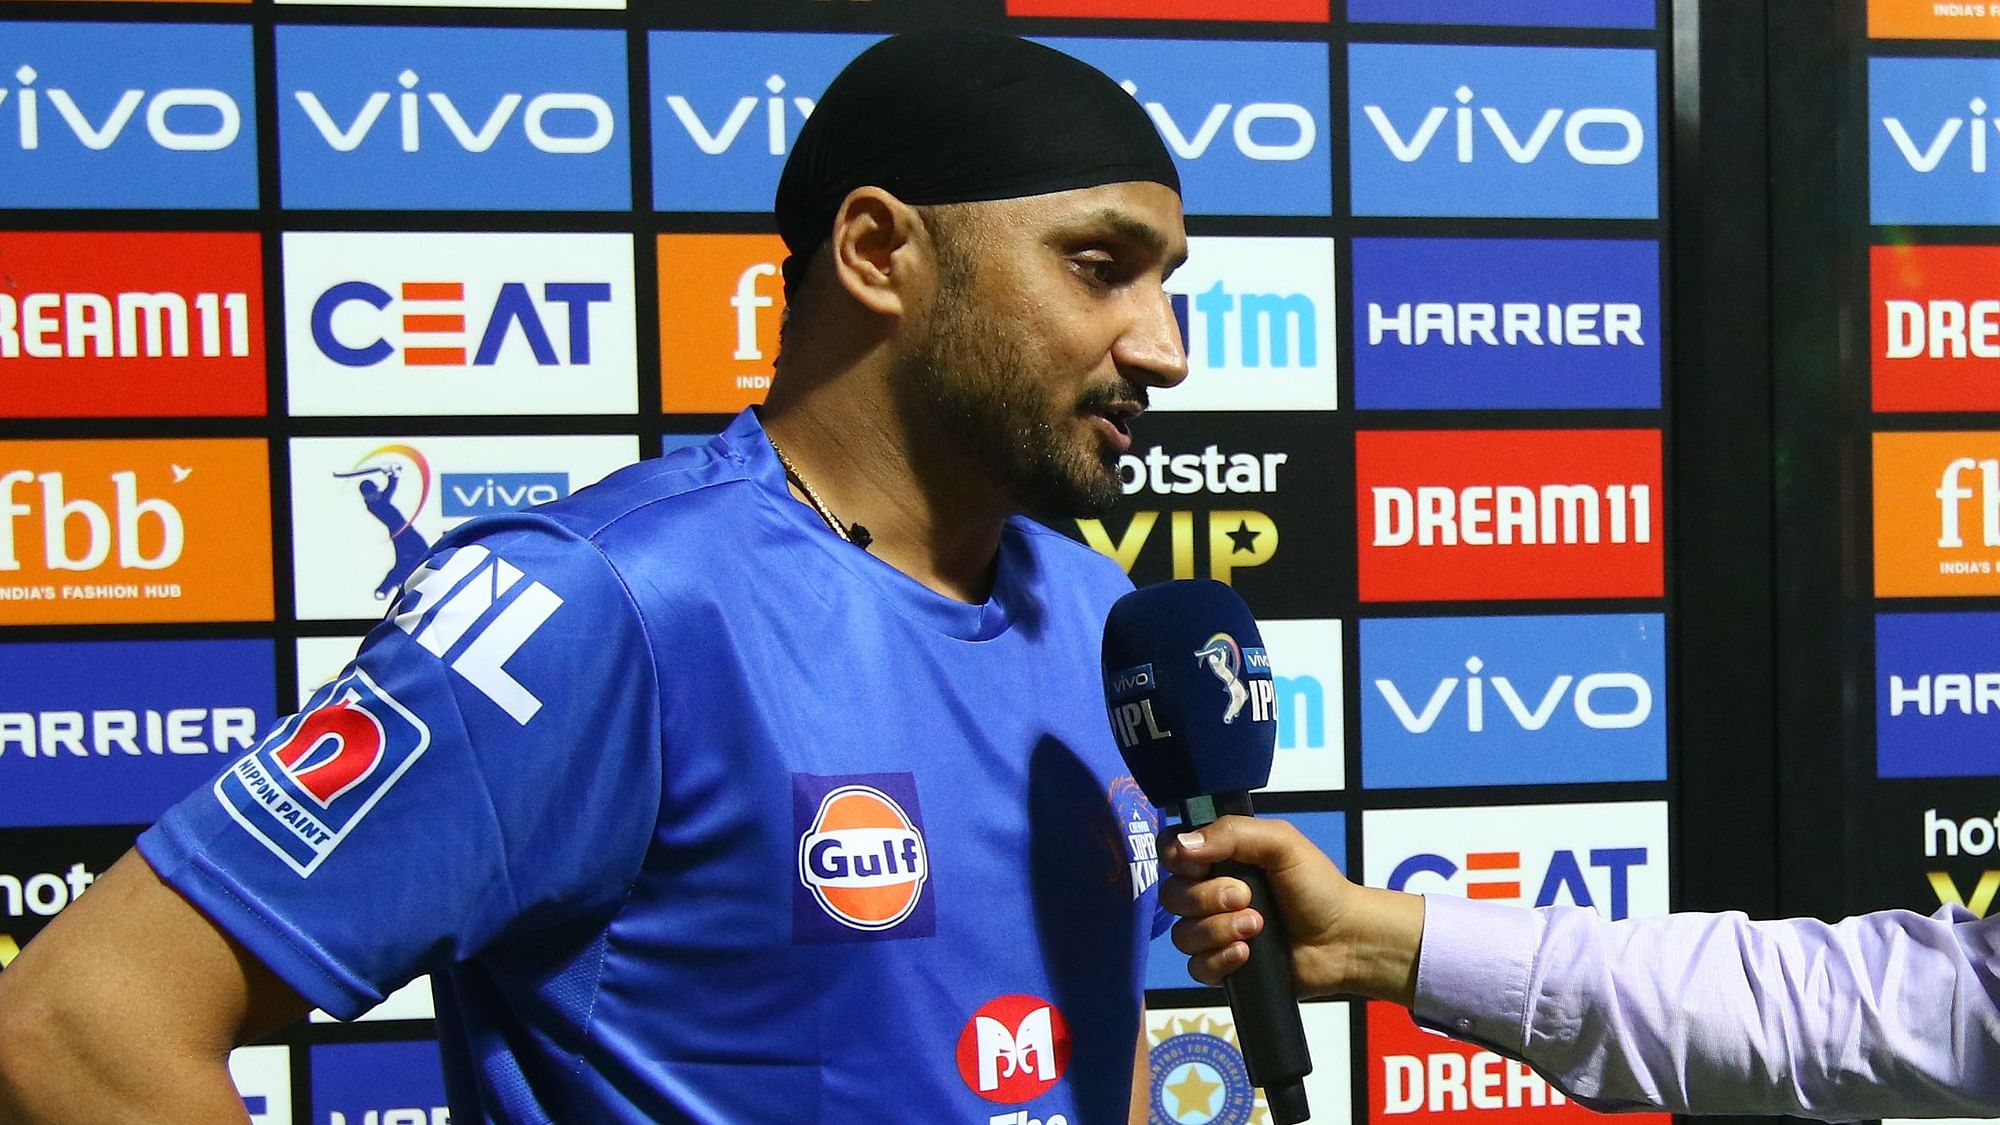 The seasoned Harbhajan Singh is glad to be back in action after being laid low by health issues.